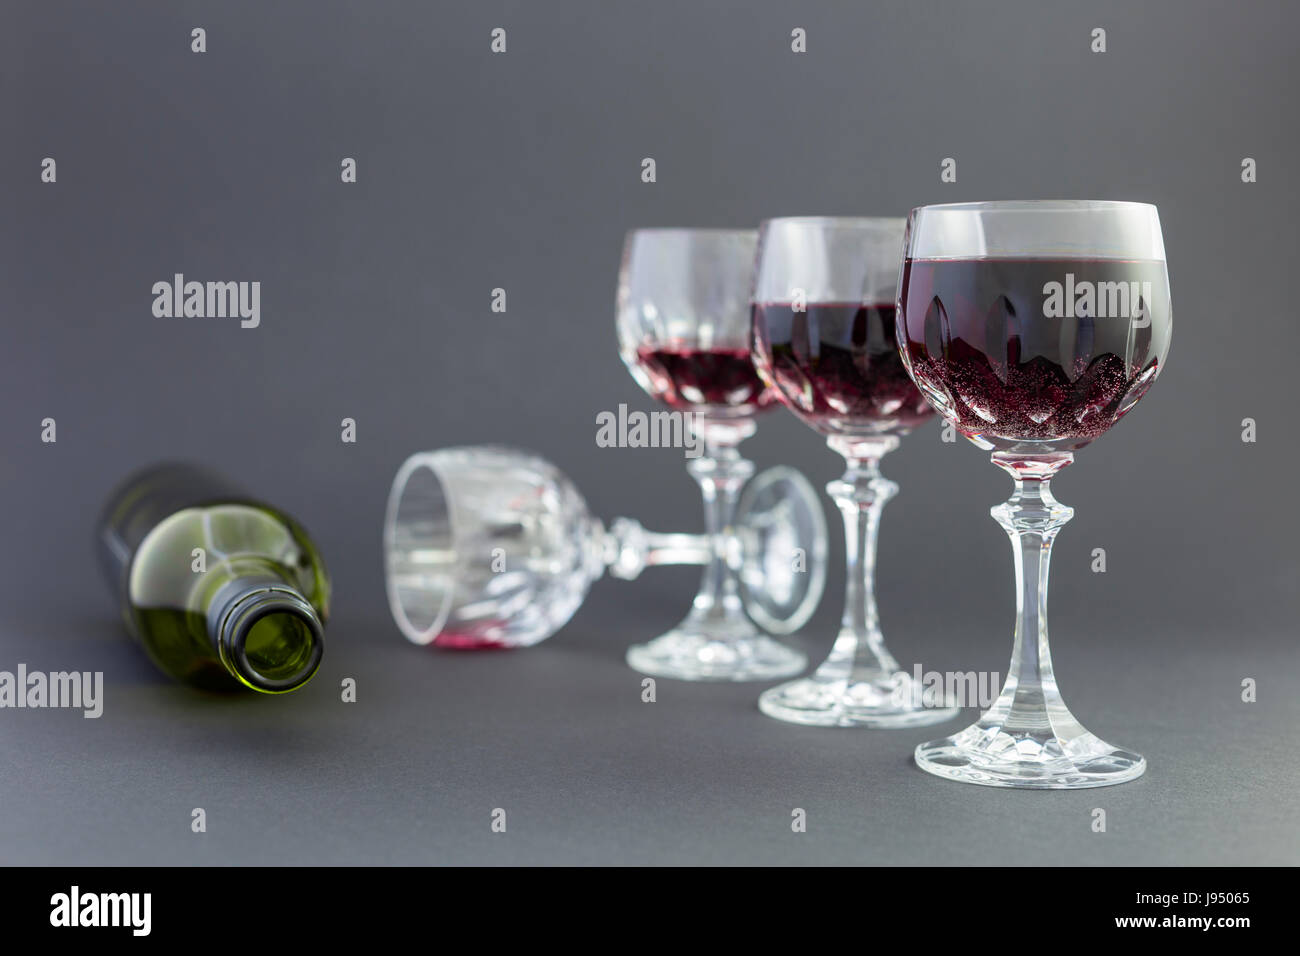 Concept of alcohol consumption, alcoholism and abuse with a line of beautiful crystal glasses filled with red wine and an empty bottle. Stock Photo